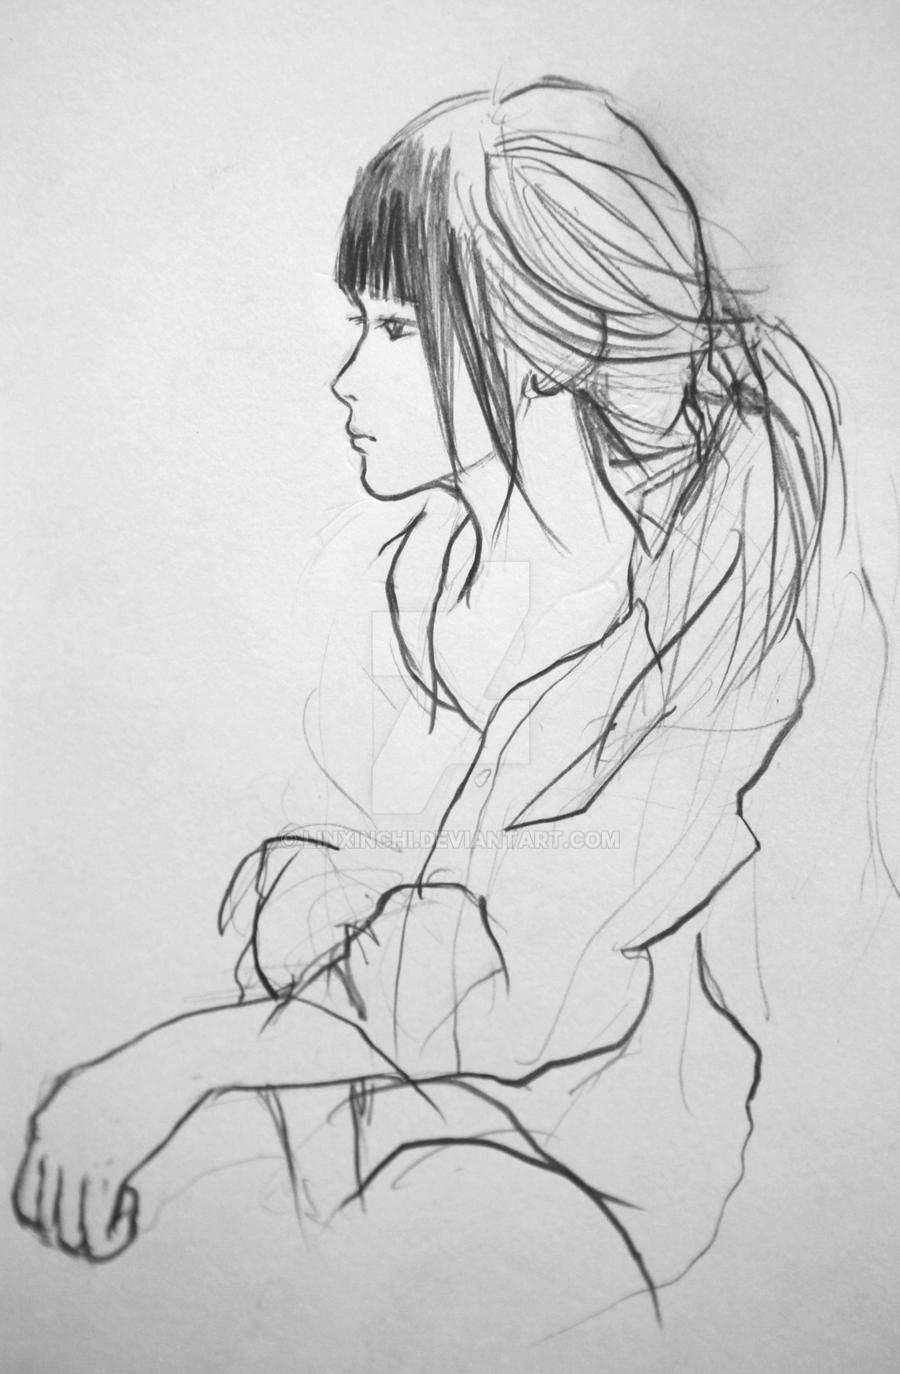 Miss You Pencil Line Drawing By Linxinchi On Deviantart